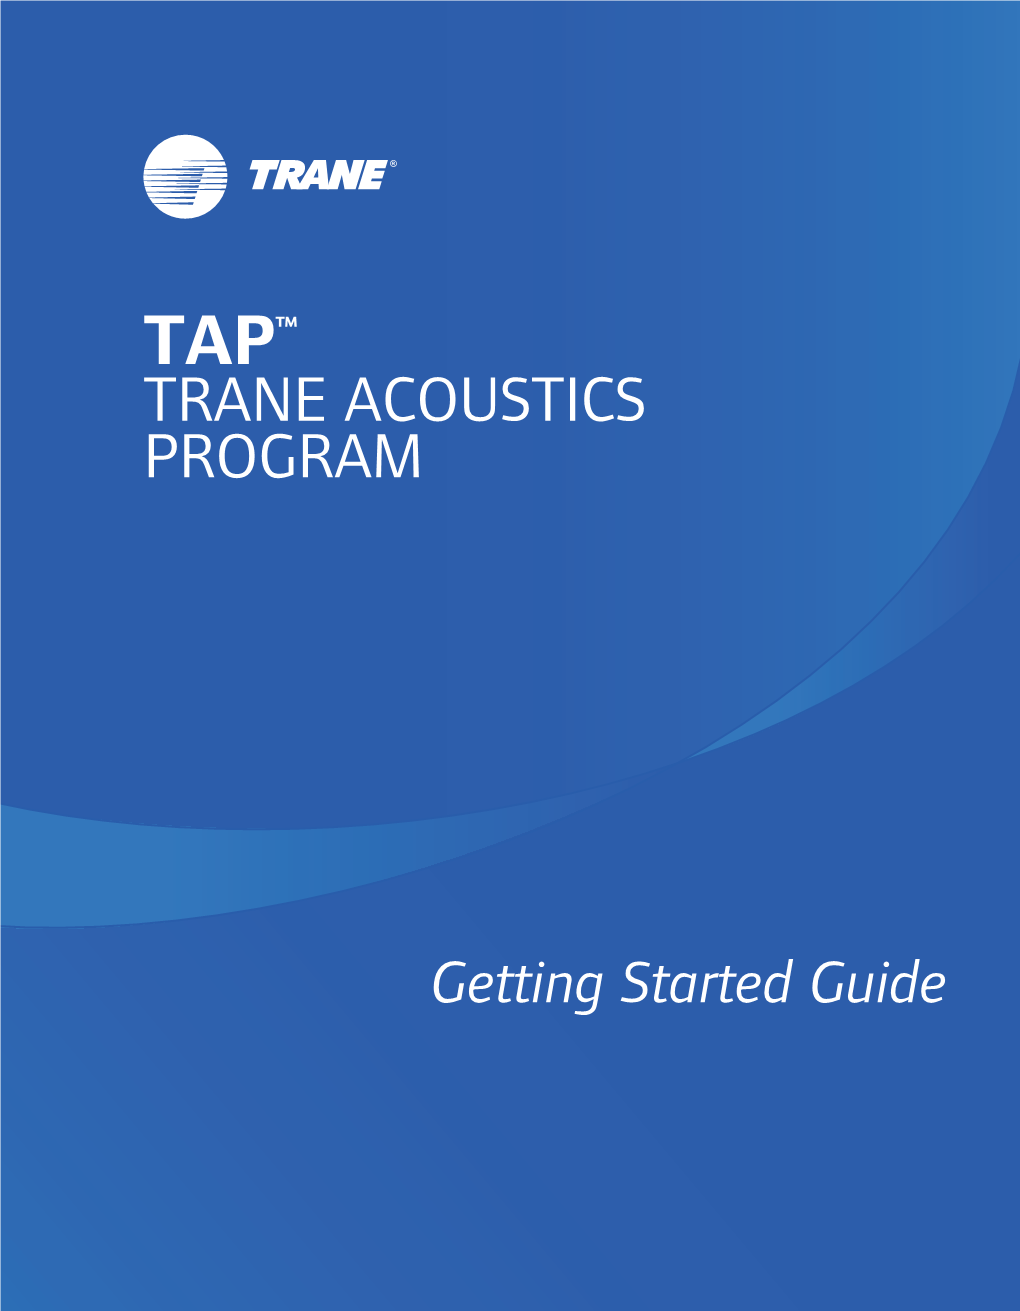 Trane Acoustics Program (TAP) Getting Started Guide